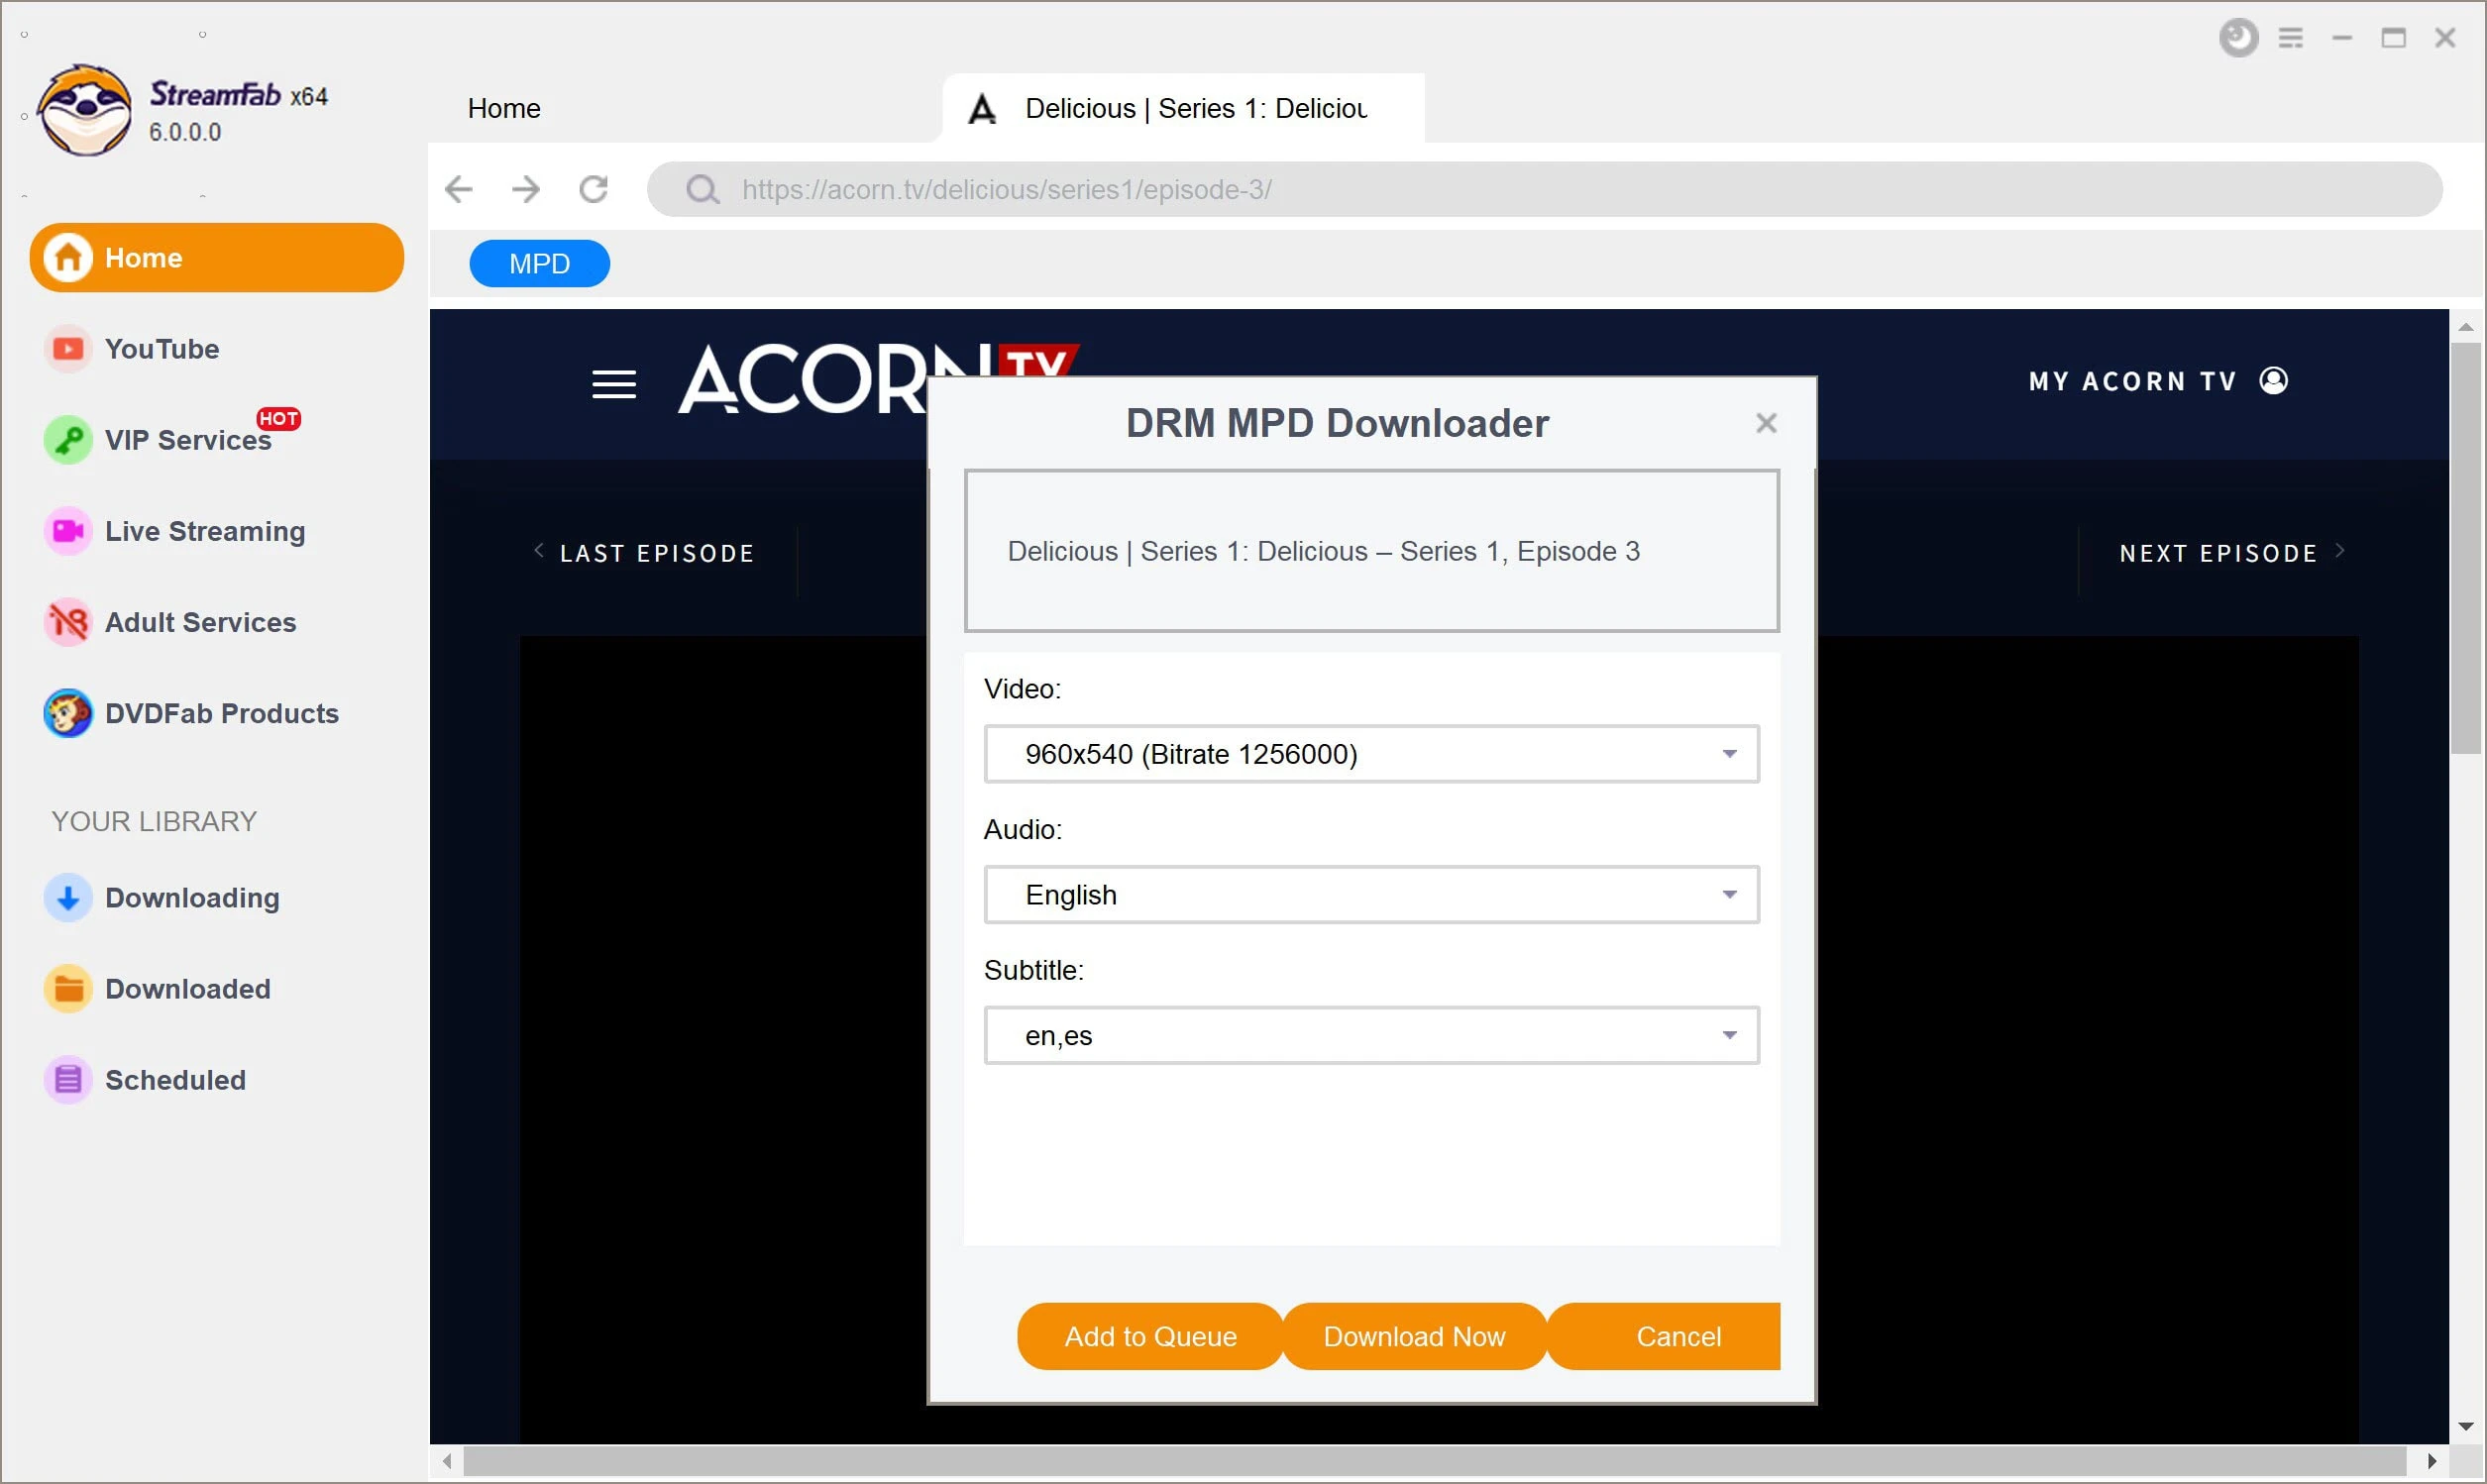 How to download videos from Acorn TV